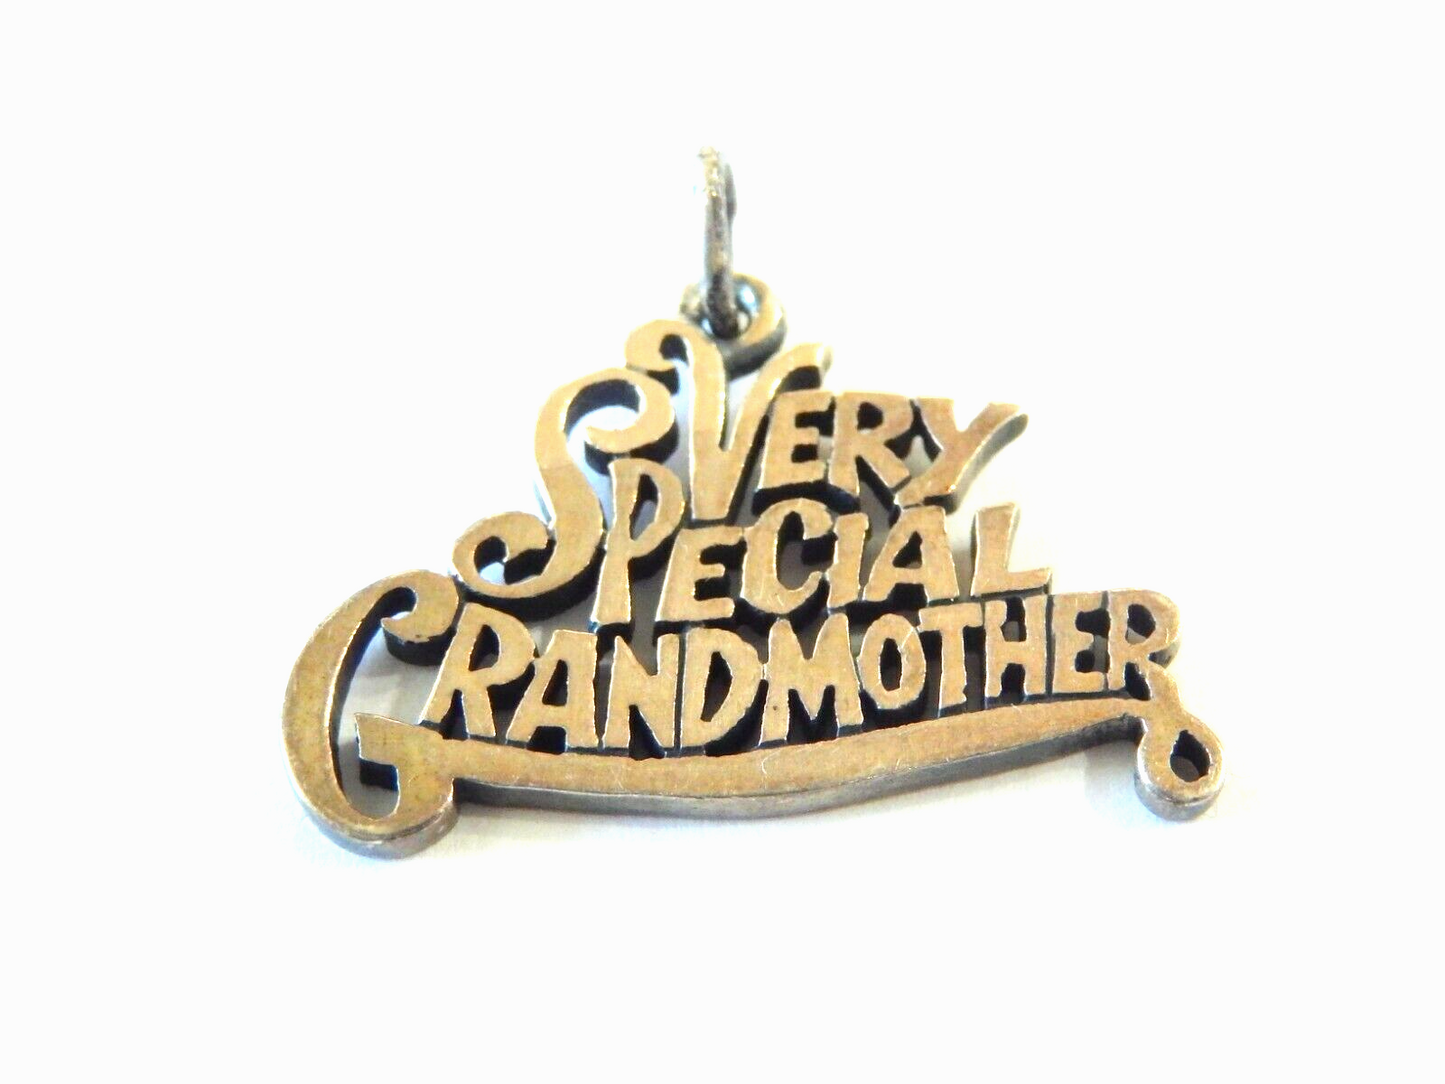 James Avery Sterling Silver Very Special Grandmother Charm